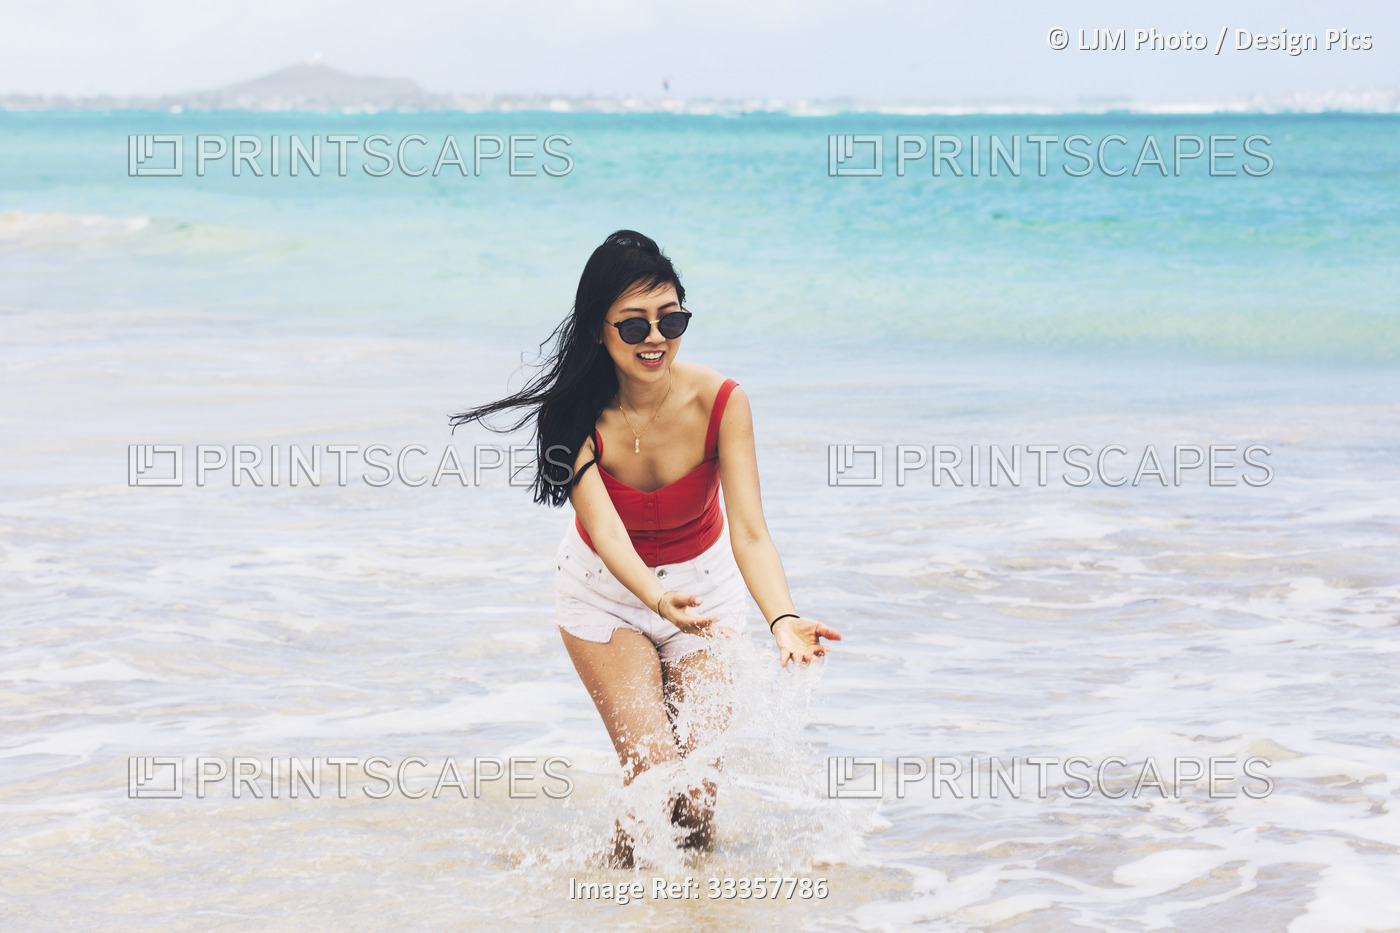 A woman stands in the surf, bending to touch the splashing water, as she enjoys ...